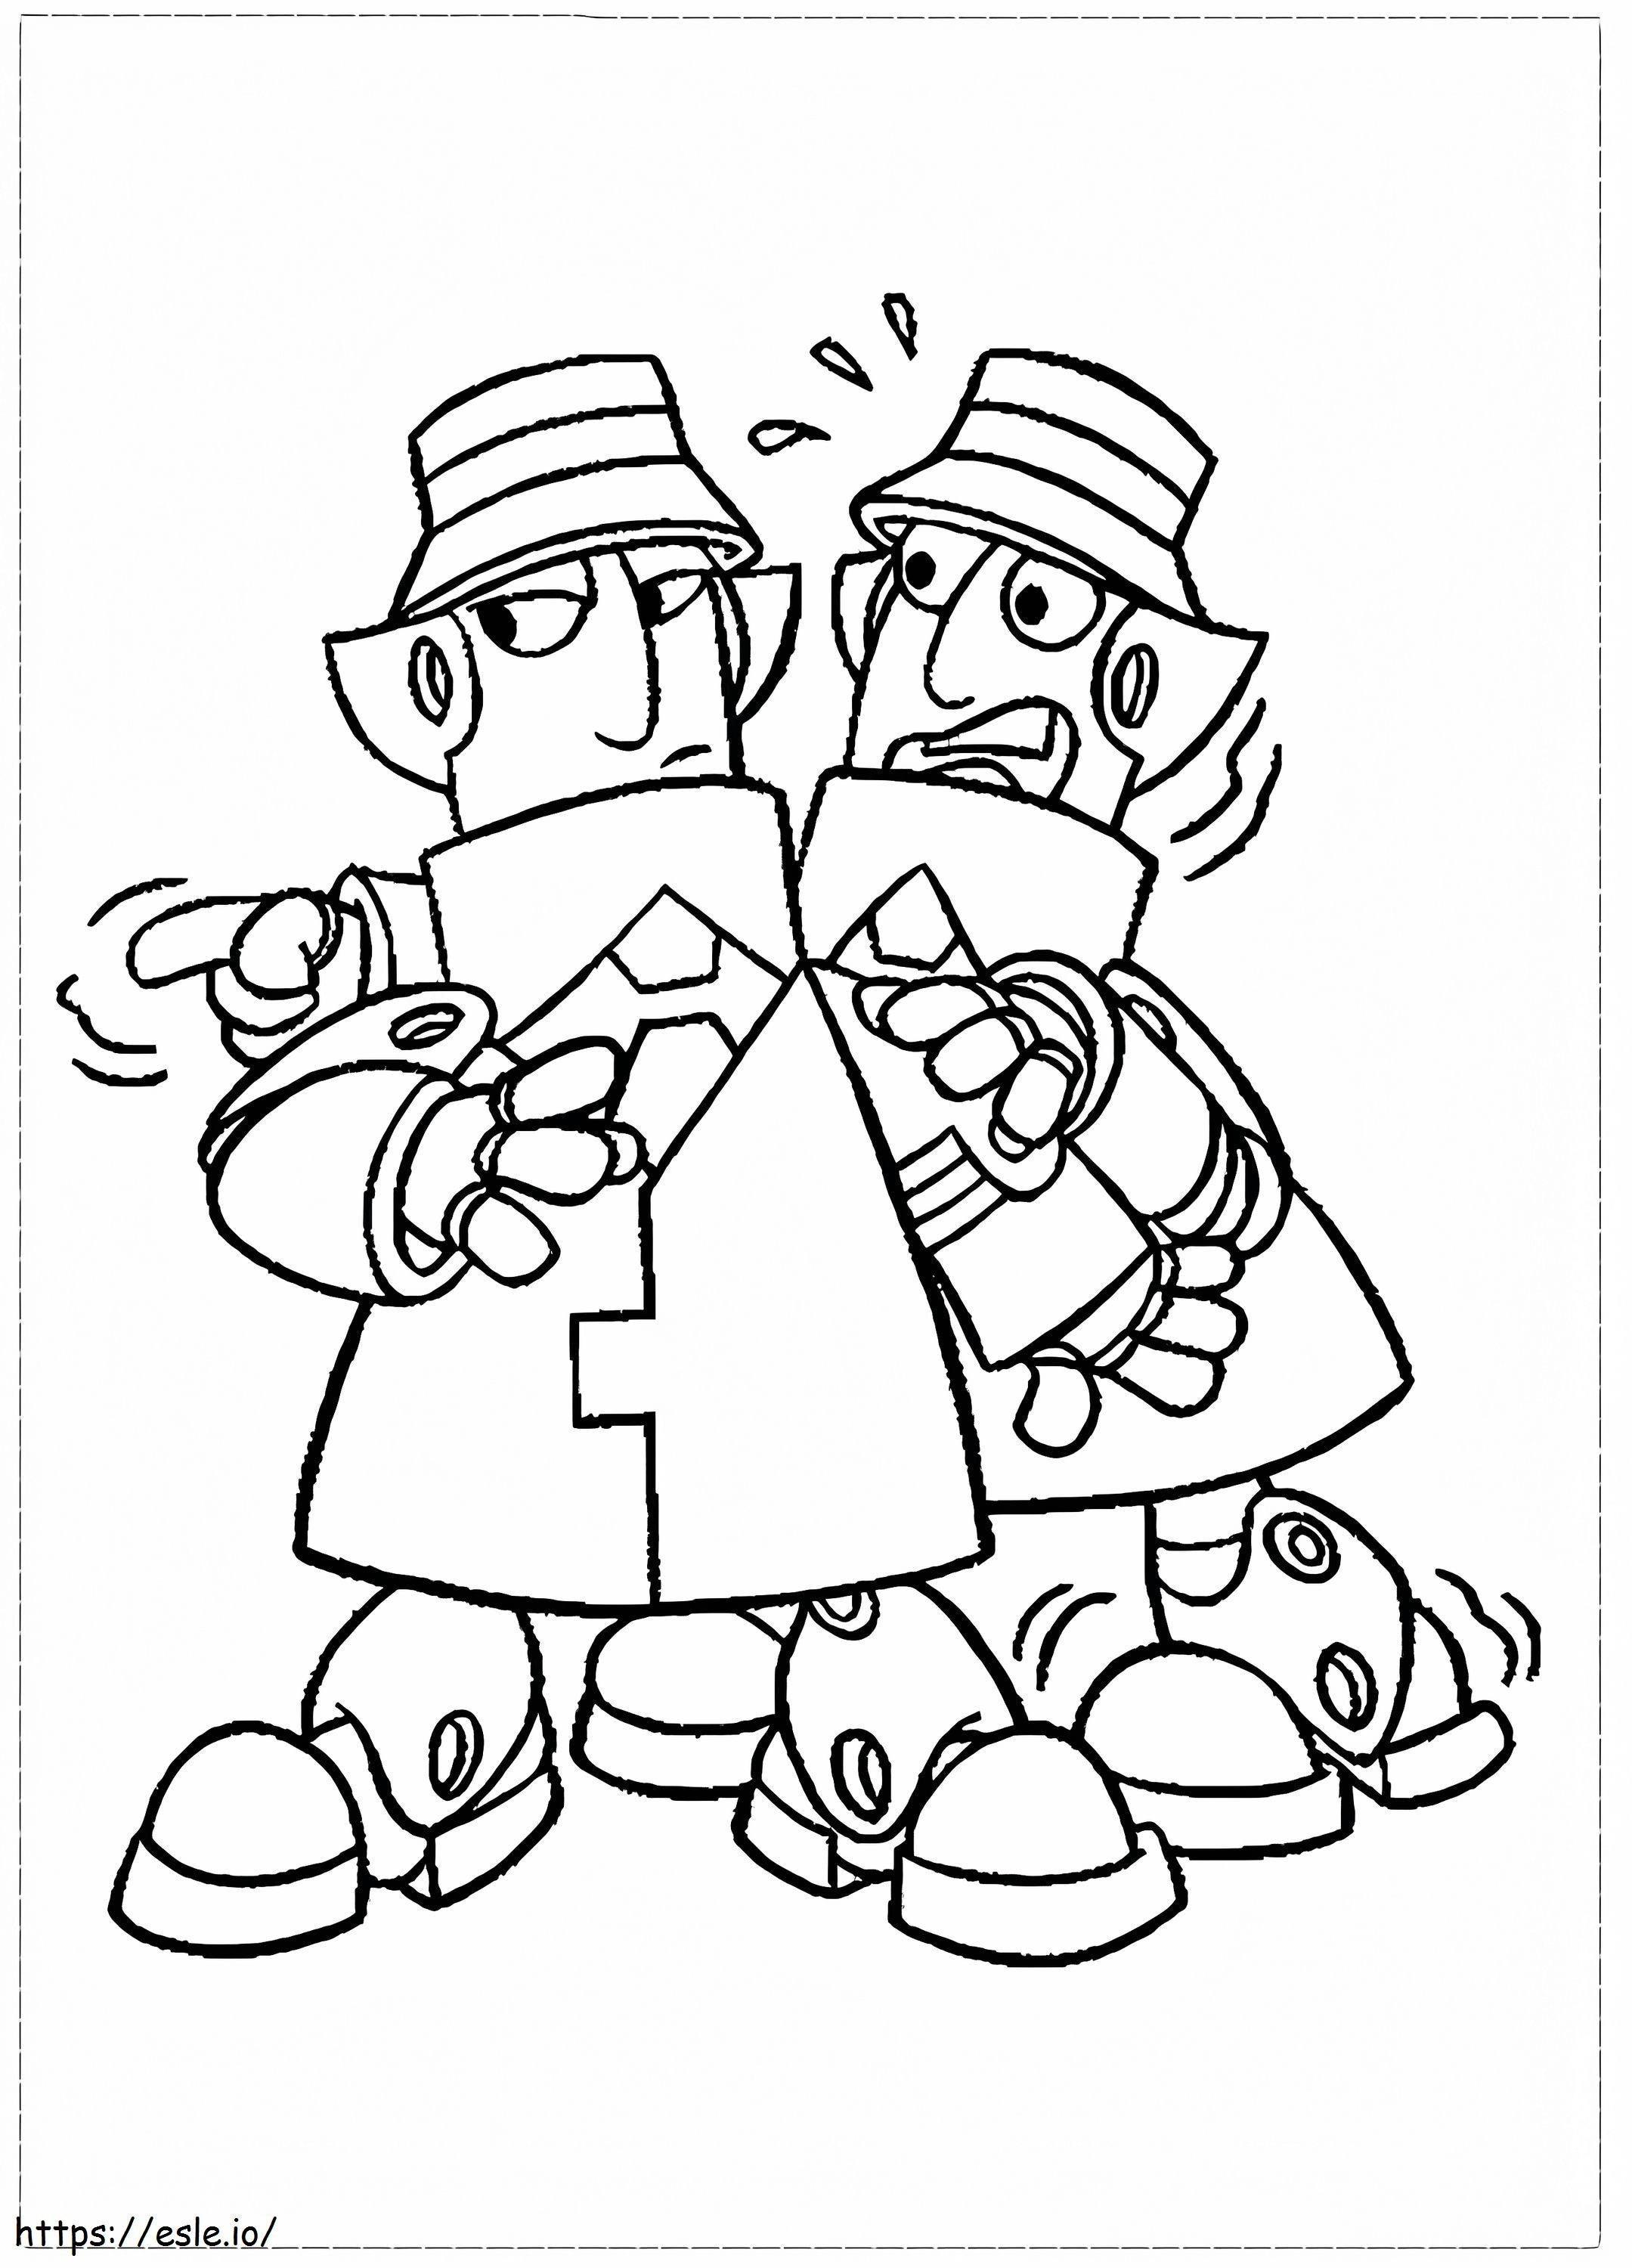 Tiny Inspector Gadget coloring page